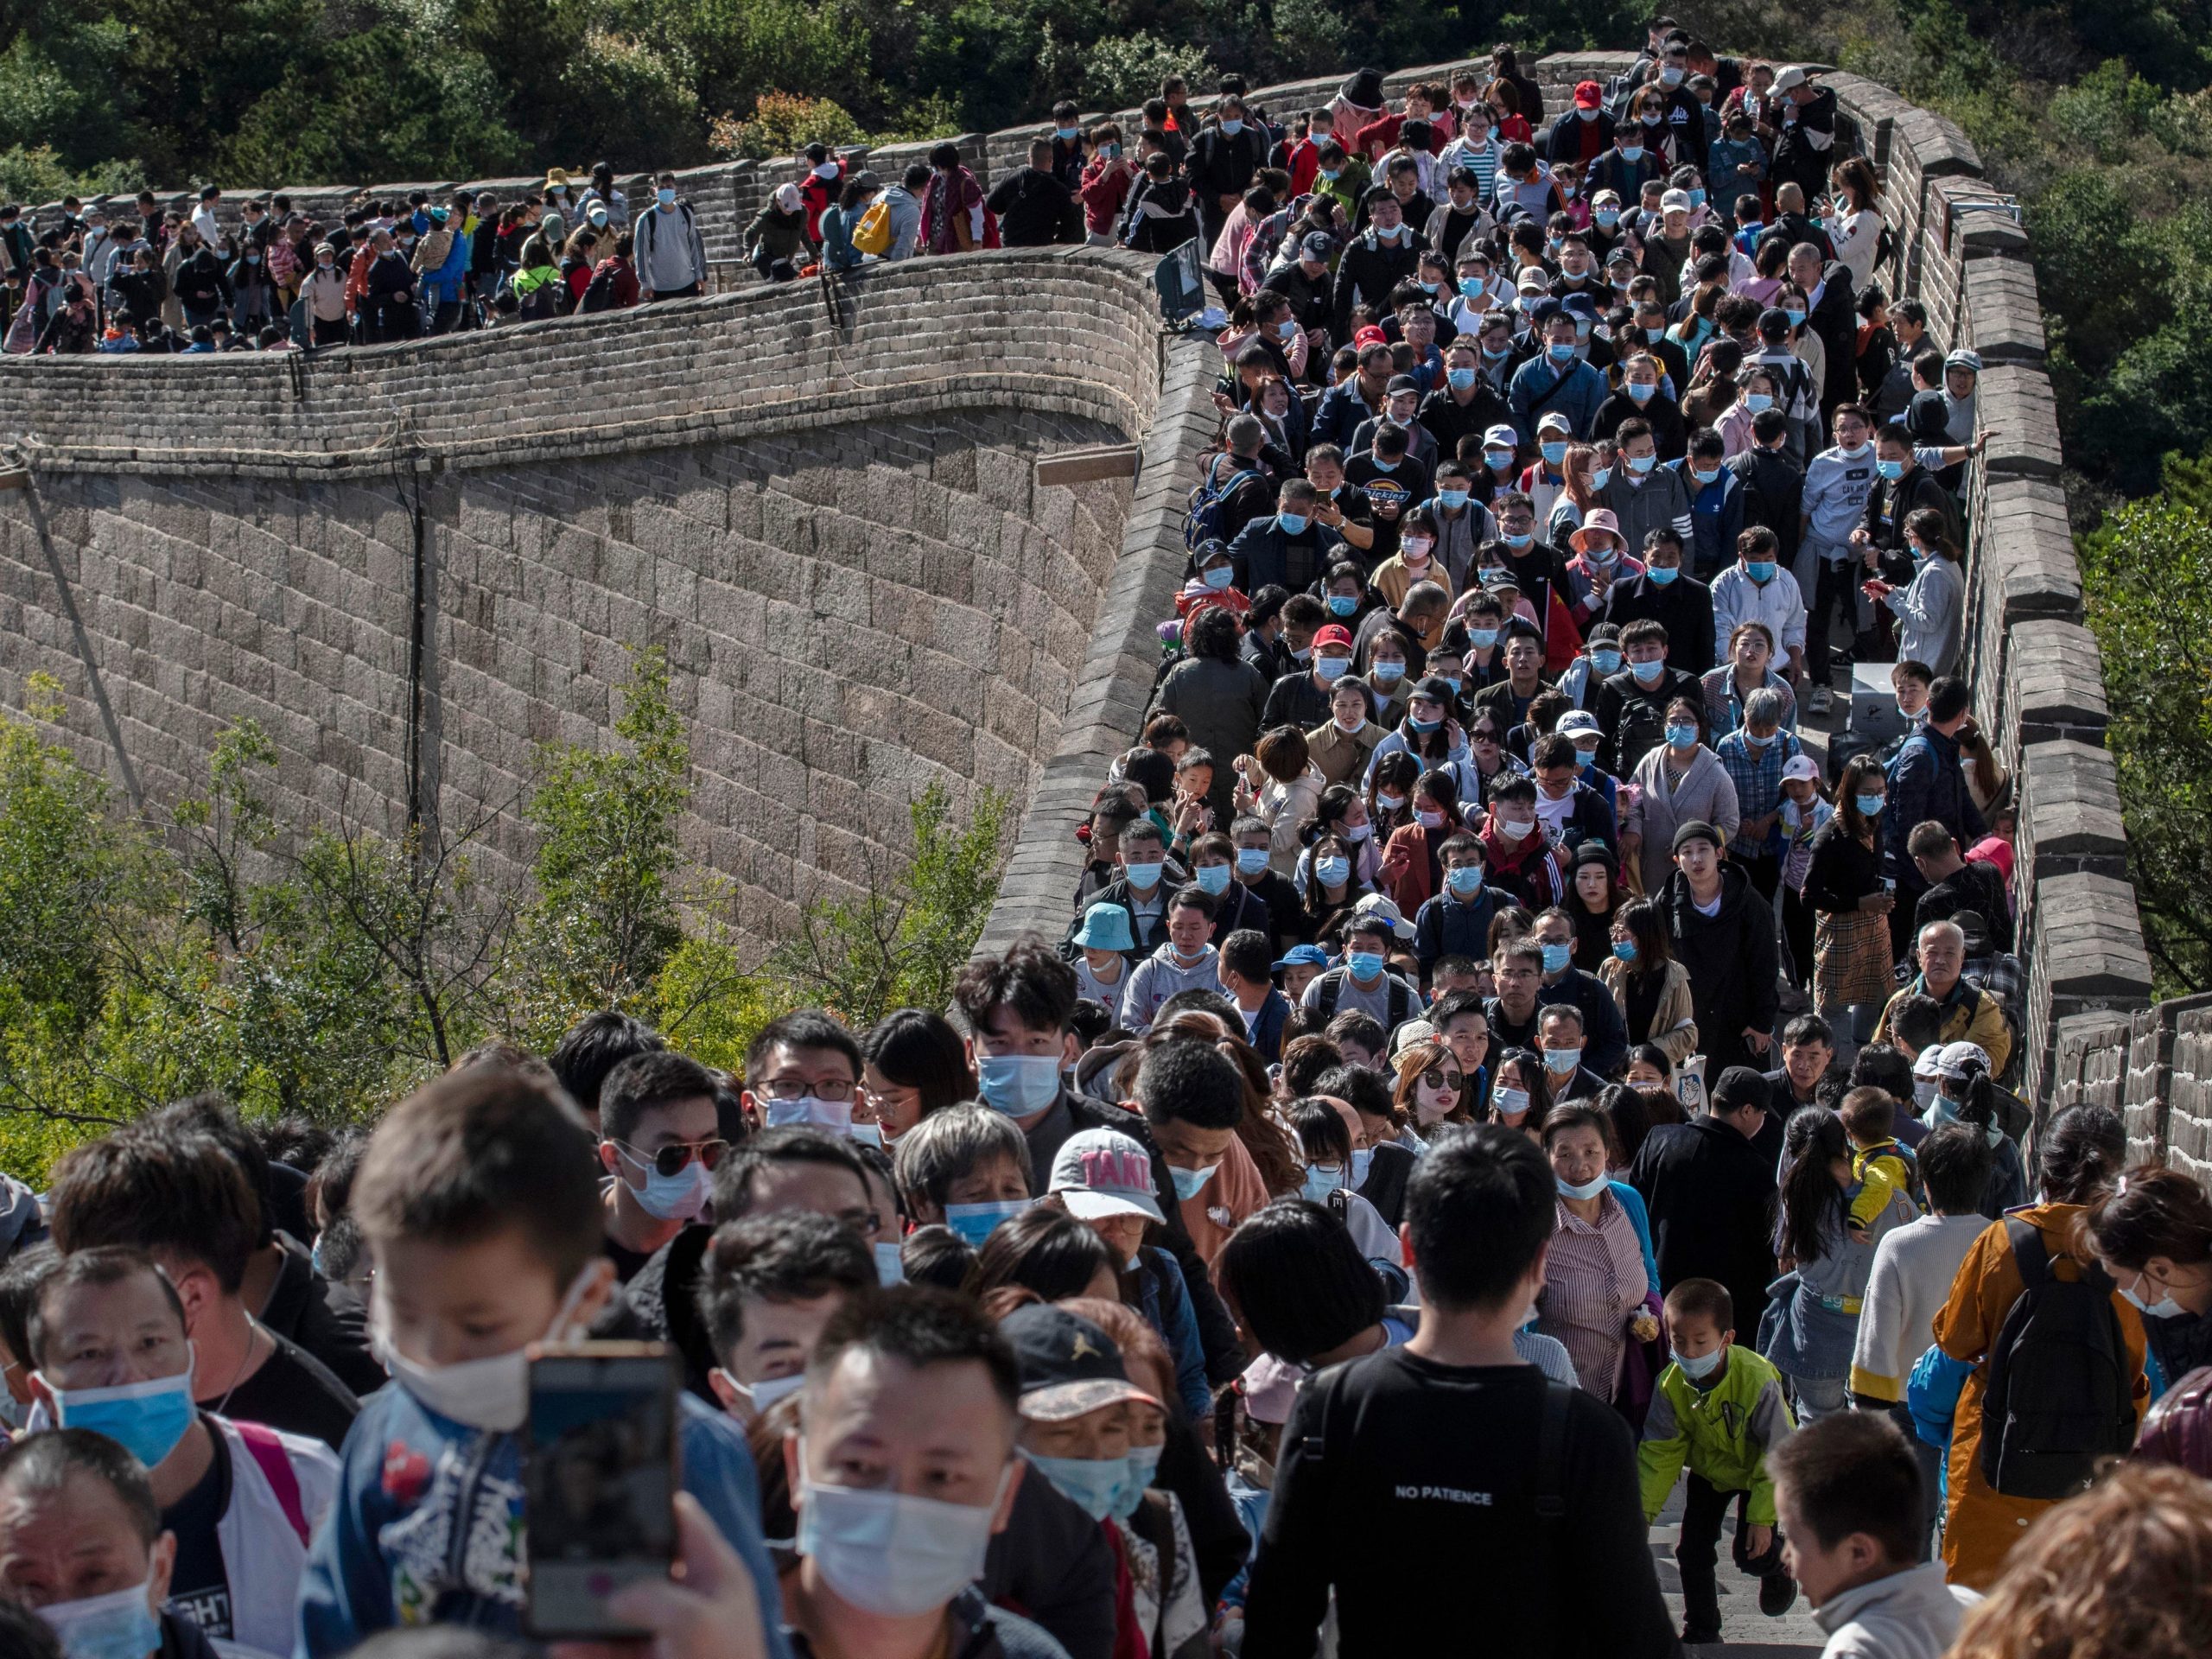 BEIJING, CHINA - OCTOBER 04: Chinese tourists crowd in a bottleneck as they move slowly on a section of the Great Wall at Badaling after tickets sold out during the 'Golden Week' holiday on October 4, 2020 in Beijing, China. Officials are expecting the Golden Week holiday to boost China's consumer economy as people were encouraged to use the 8-day break to travel and spend. Tourist sites including the Great Wall were packed, with tickets selling out most days given pandemic restrictions and capacity capped at 75%. (Photo by Kevin Frayer/Getty Images)